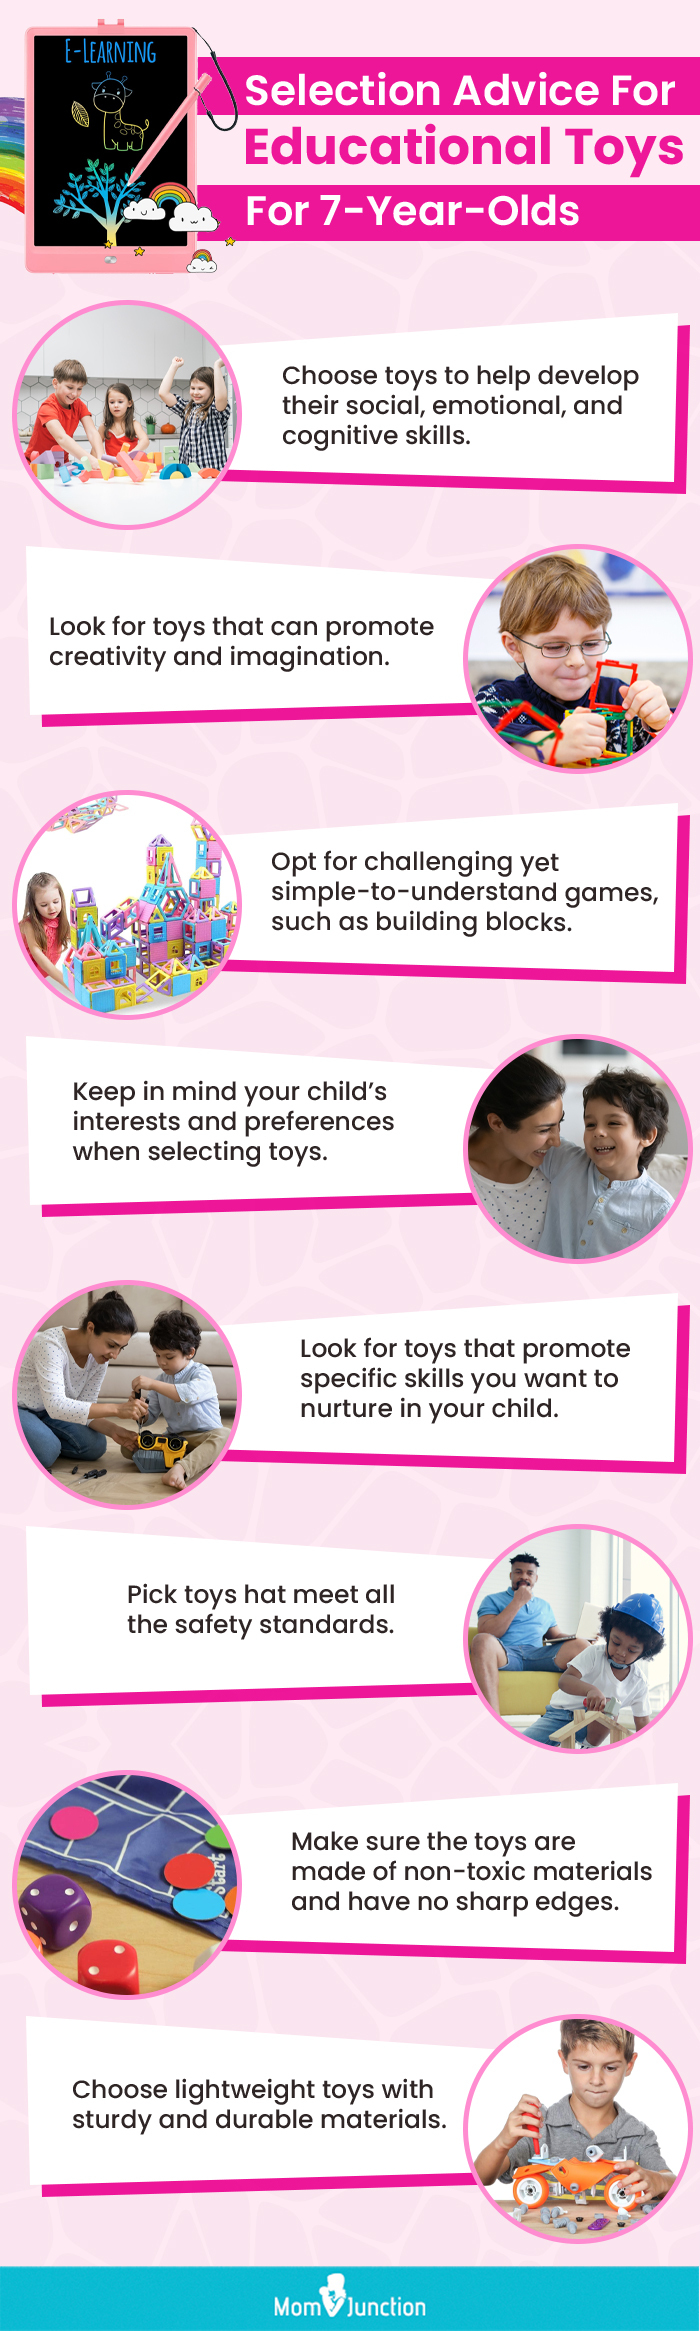 Selection Advice For Educational Toys For 7 Year Olds (infographic)